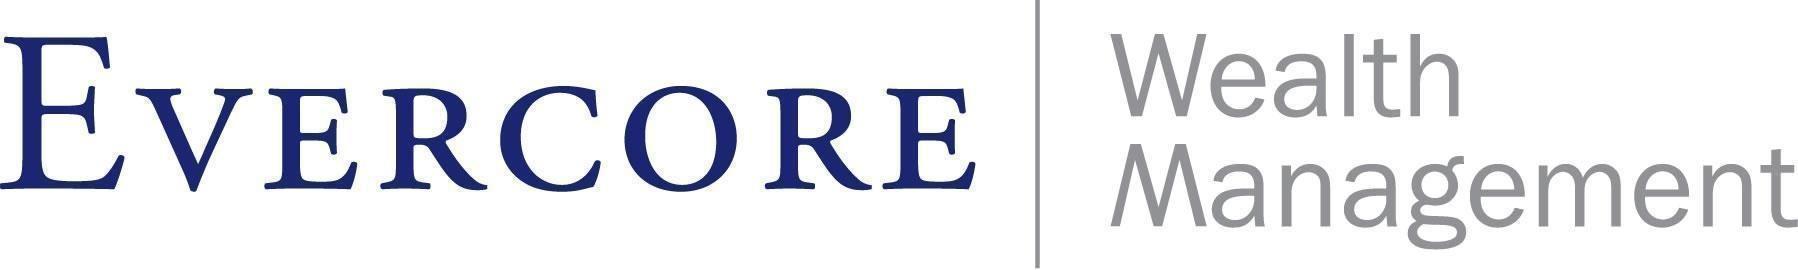 Evercore Logo - Evercore Wealth Management Competitors, Revenue and Employees ...